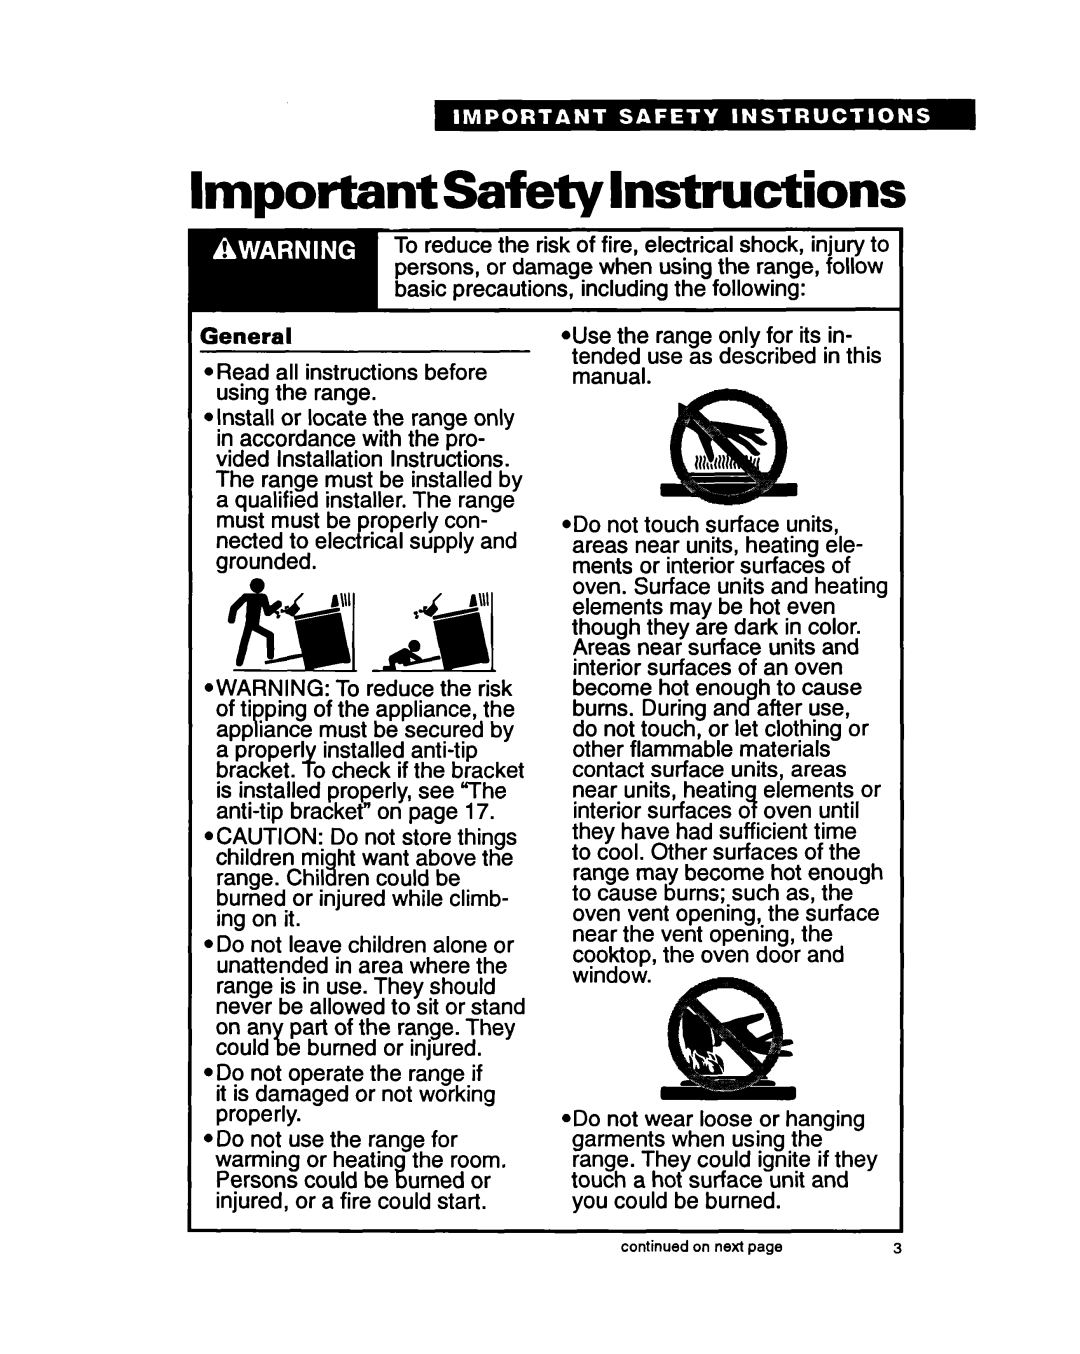 Whirlpool FEP340Y important safety instructions ImportantSafetylnstructions 